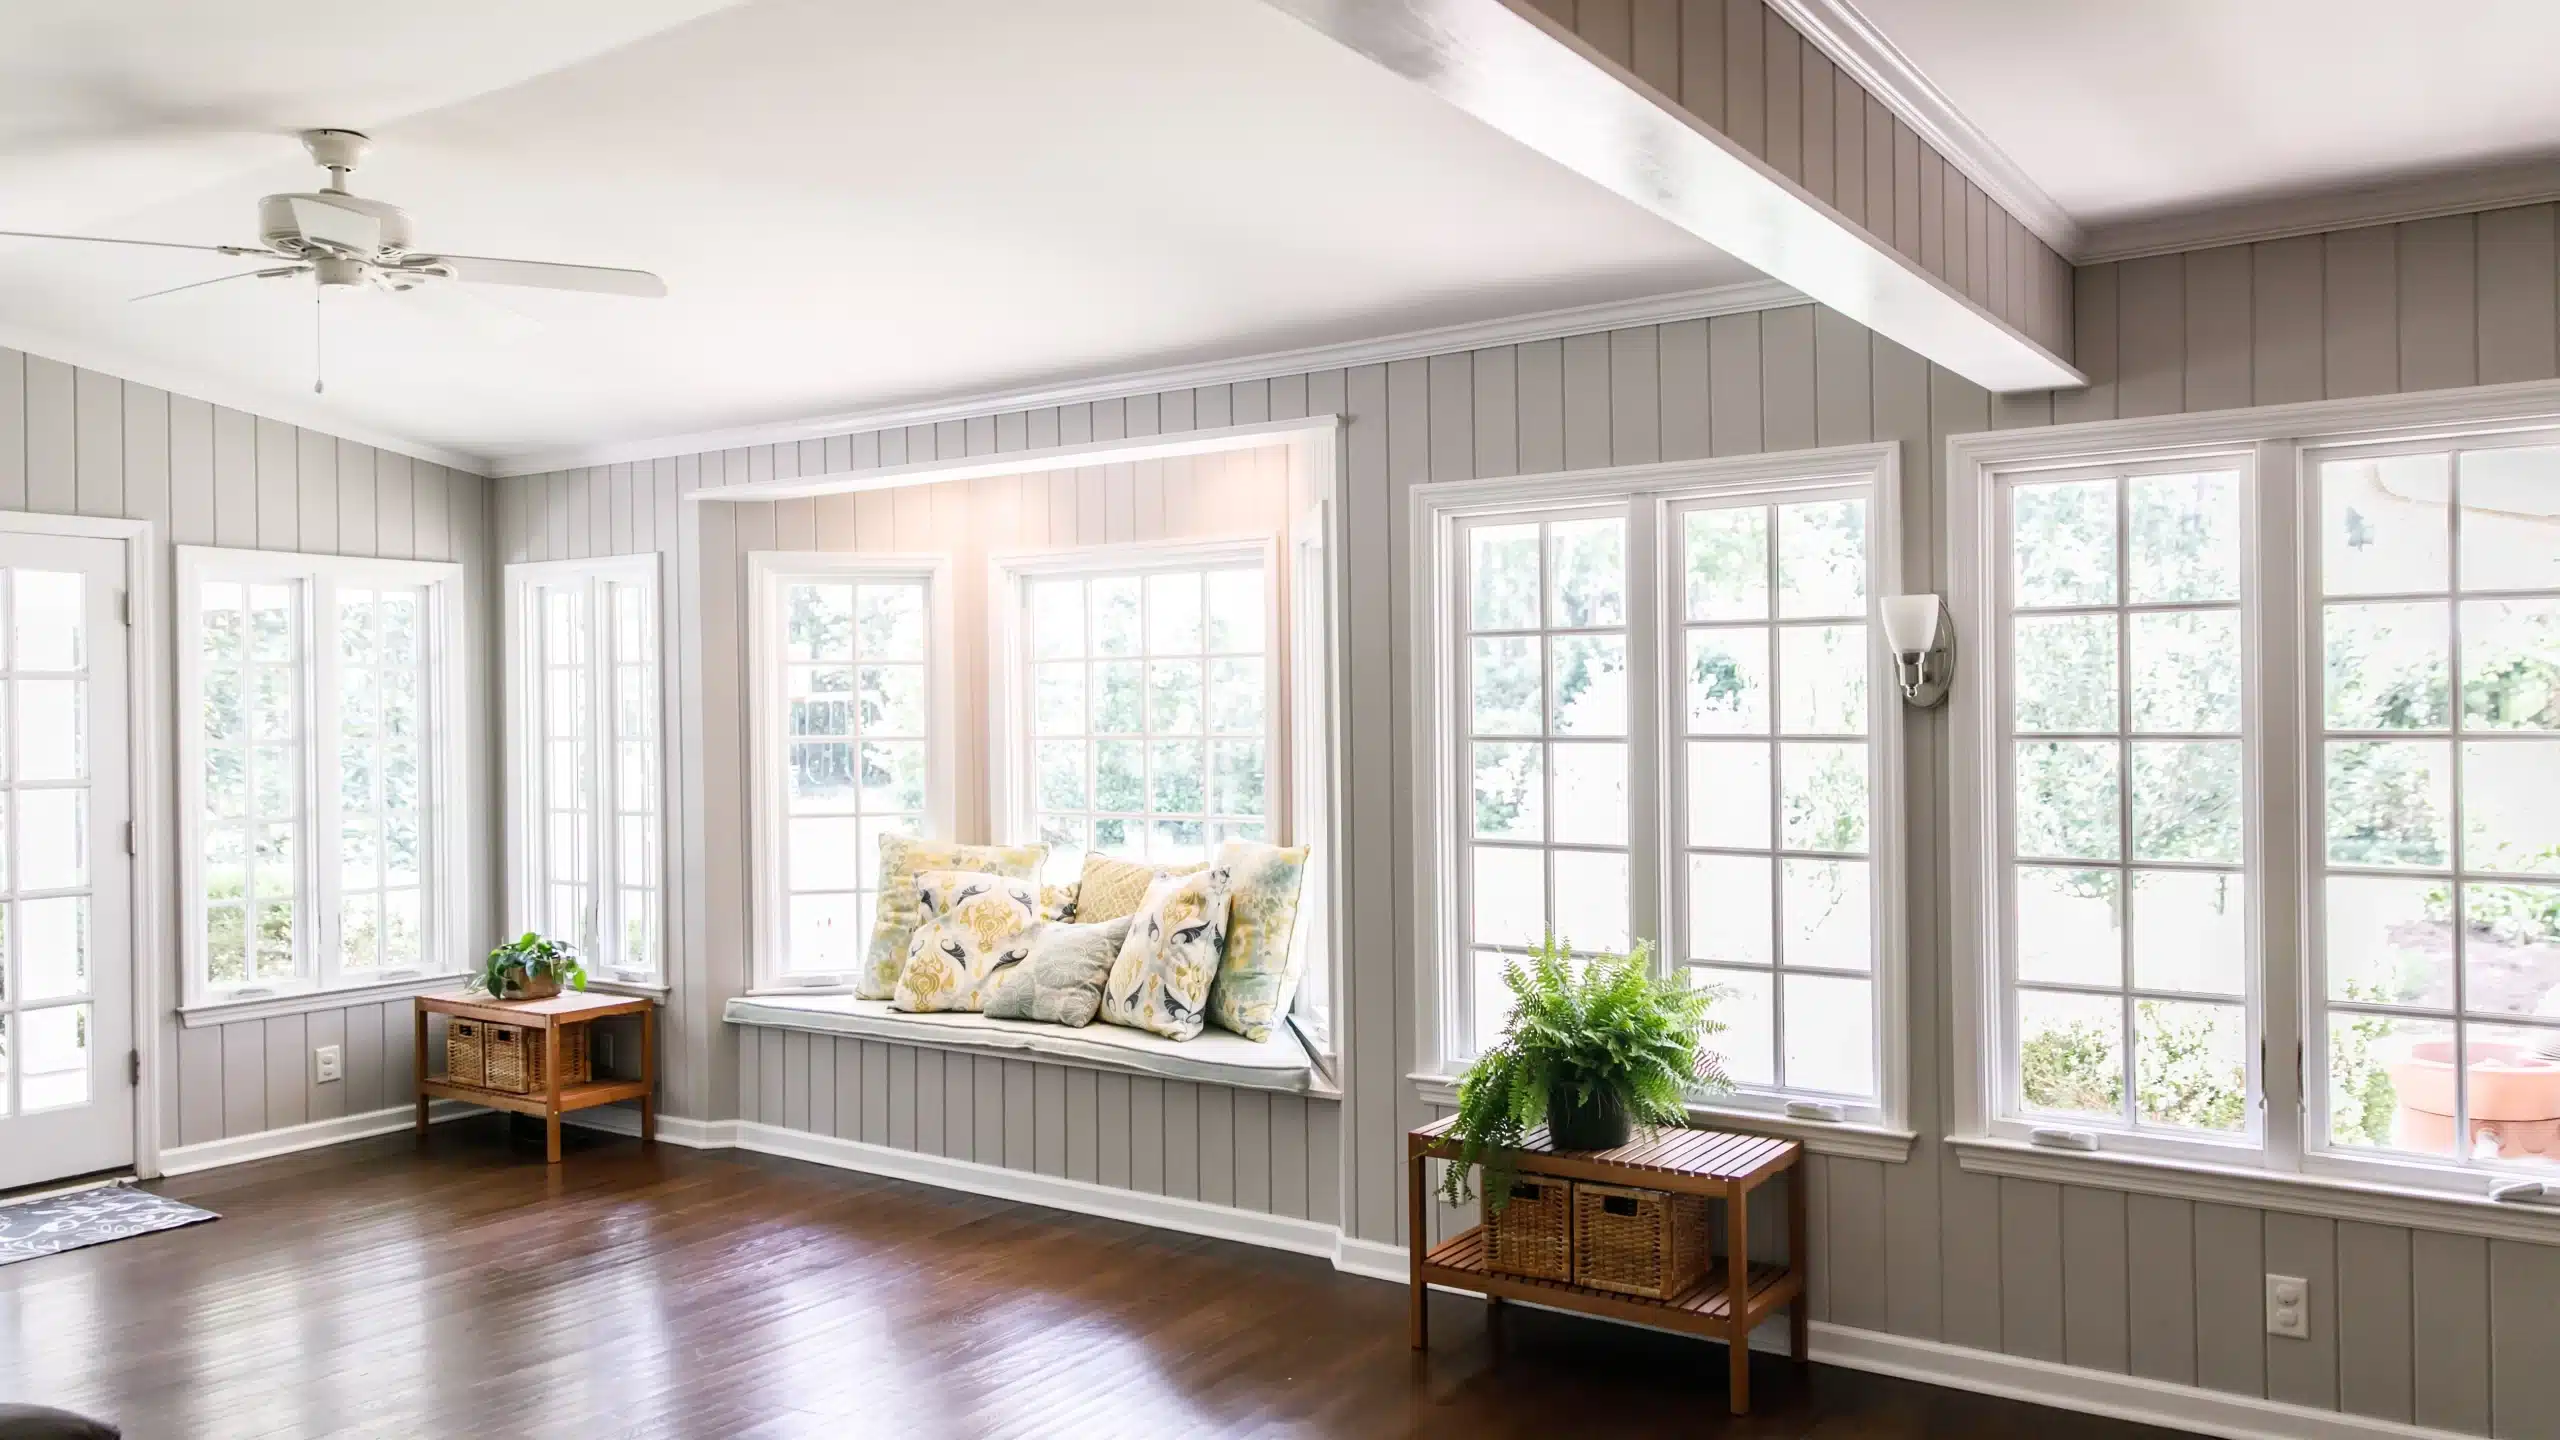 A sitting room with a wall of new windows and hardwood floors